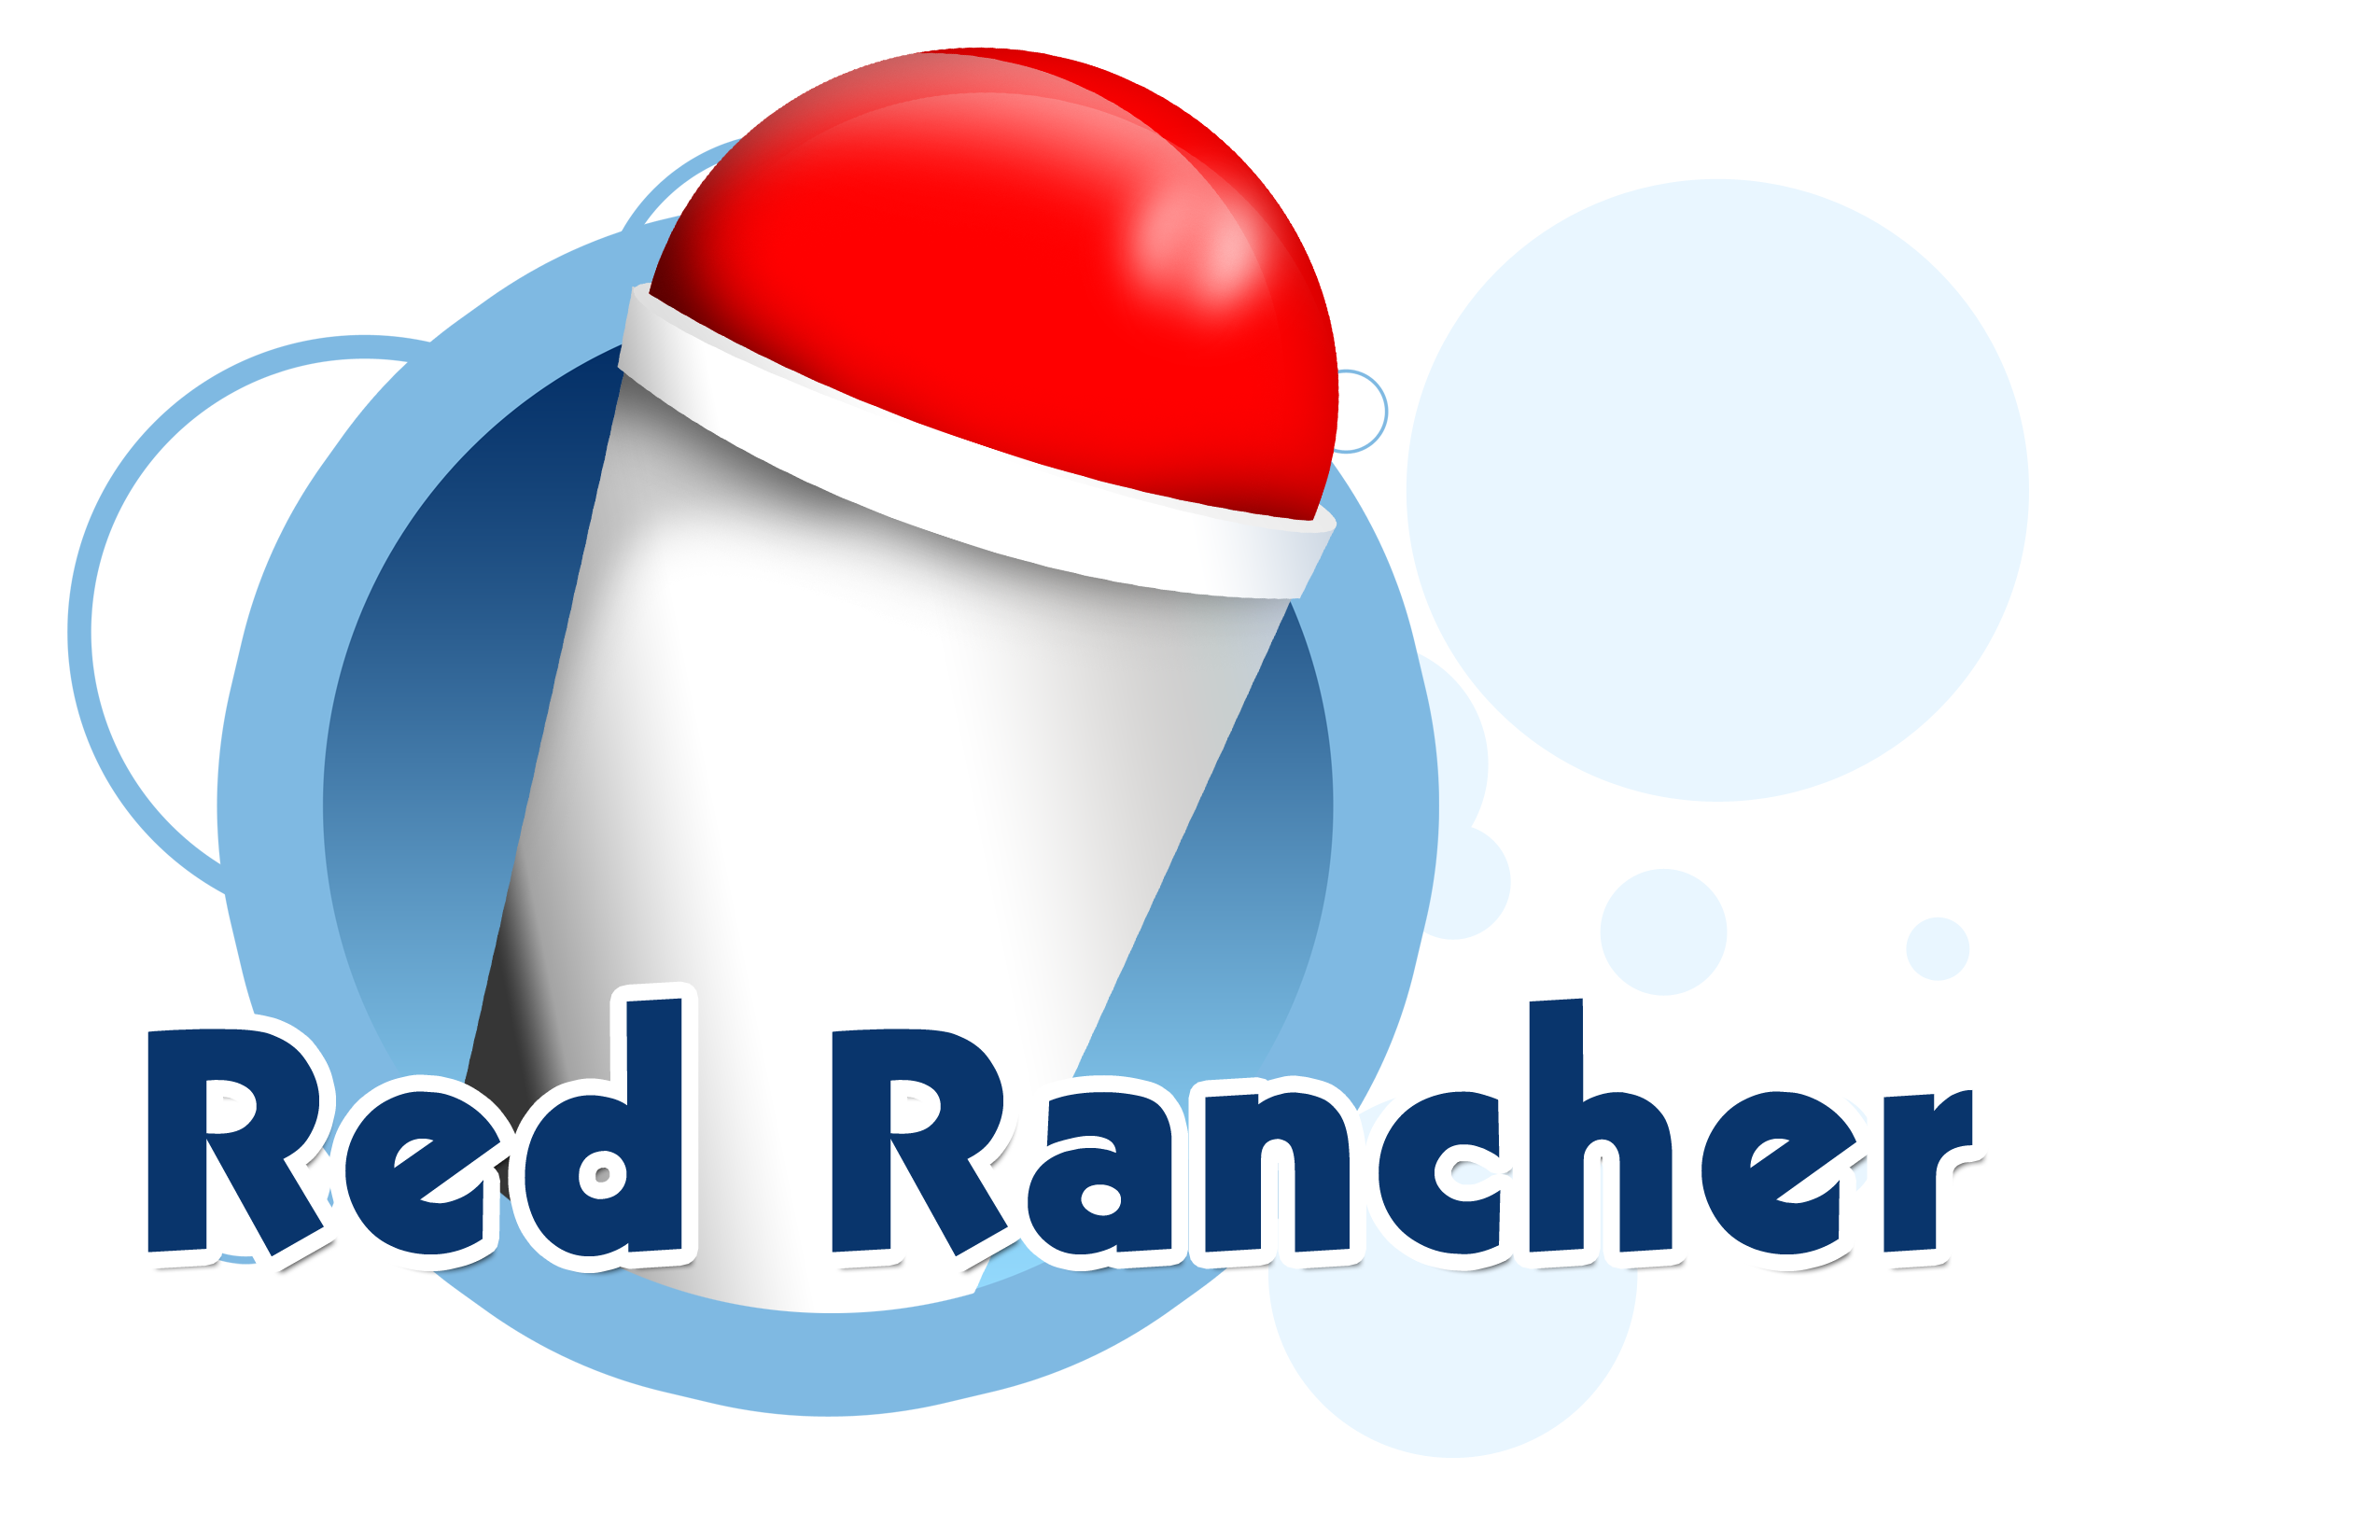 Red Rancher